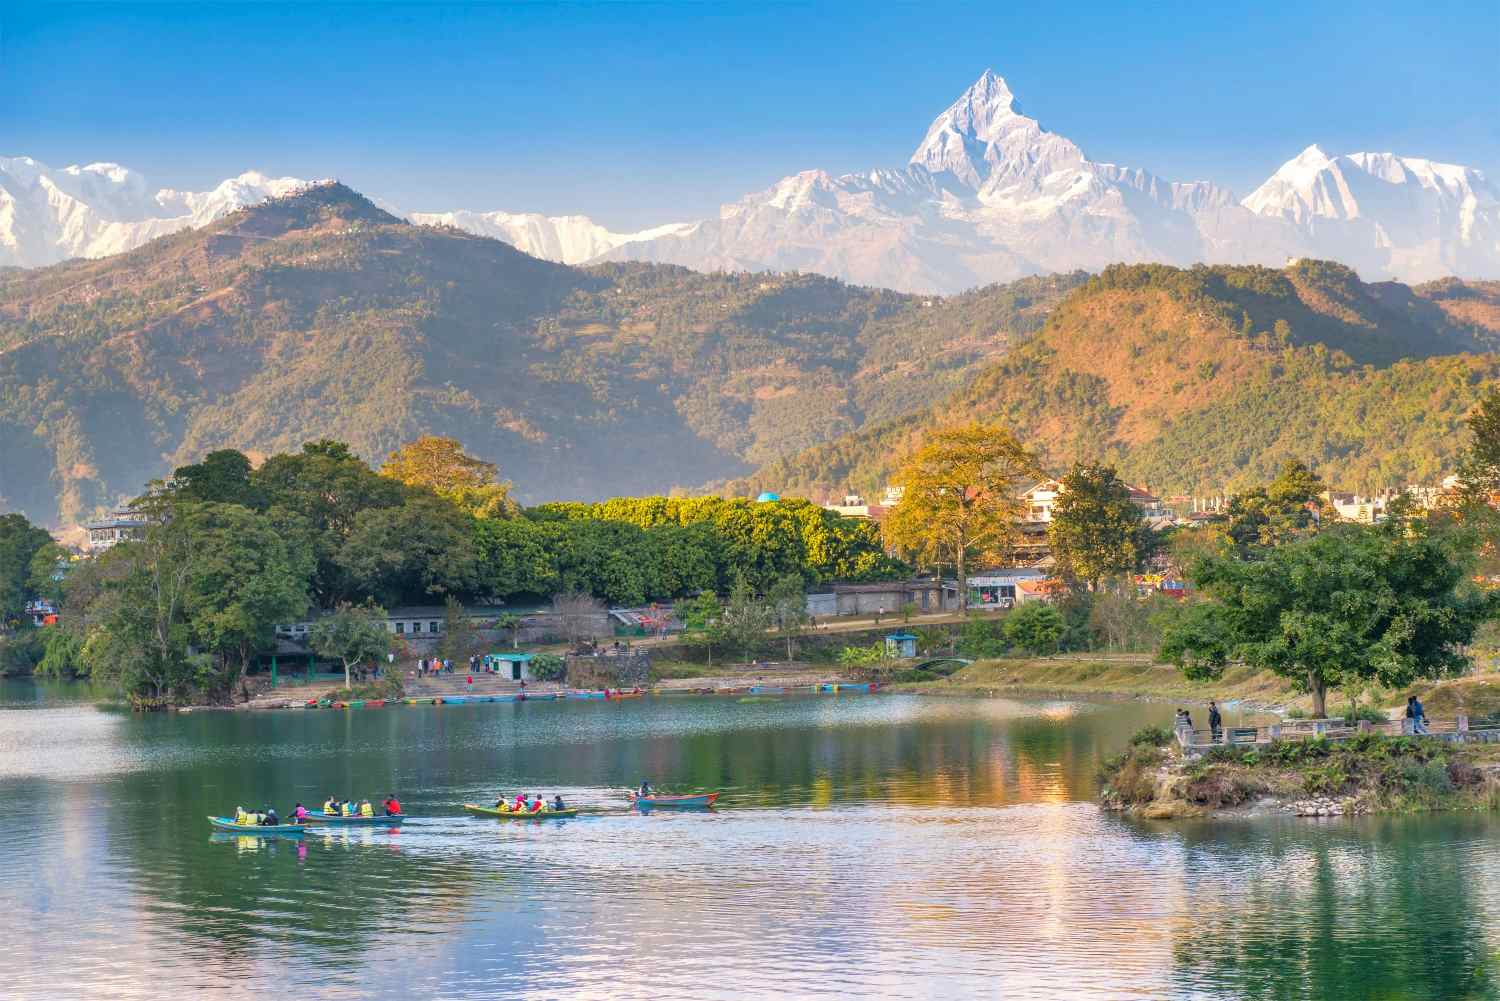 Pokhara Lake with the Annapurnas in the background, Nepal.